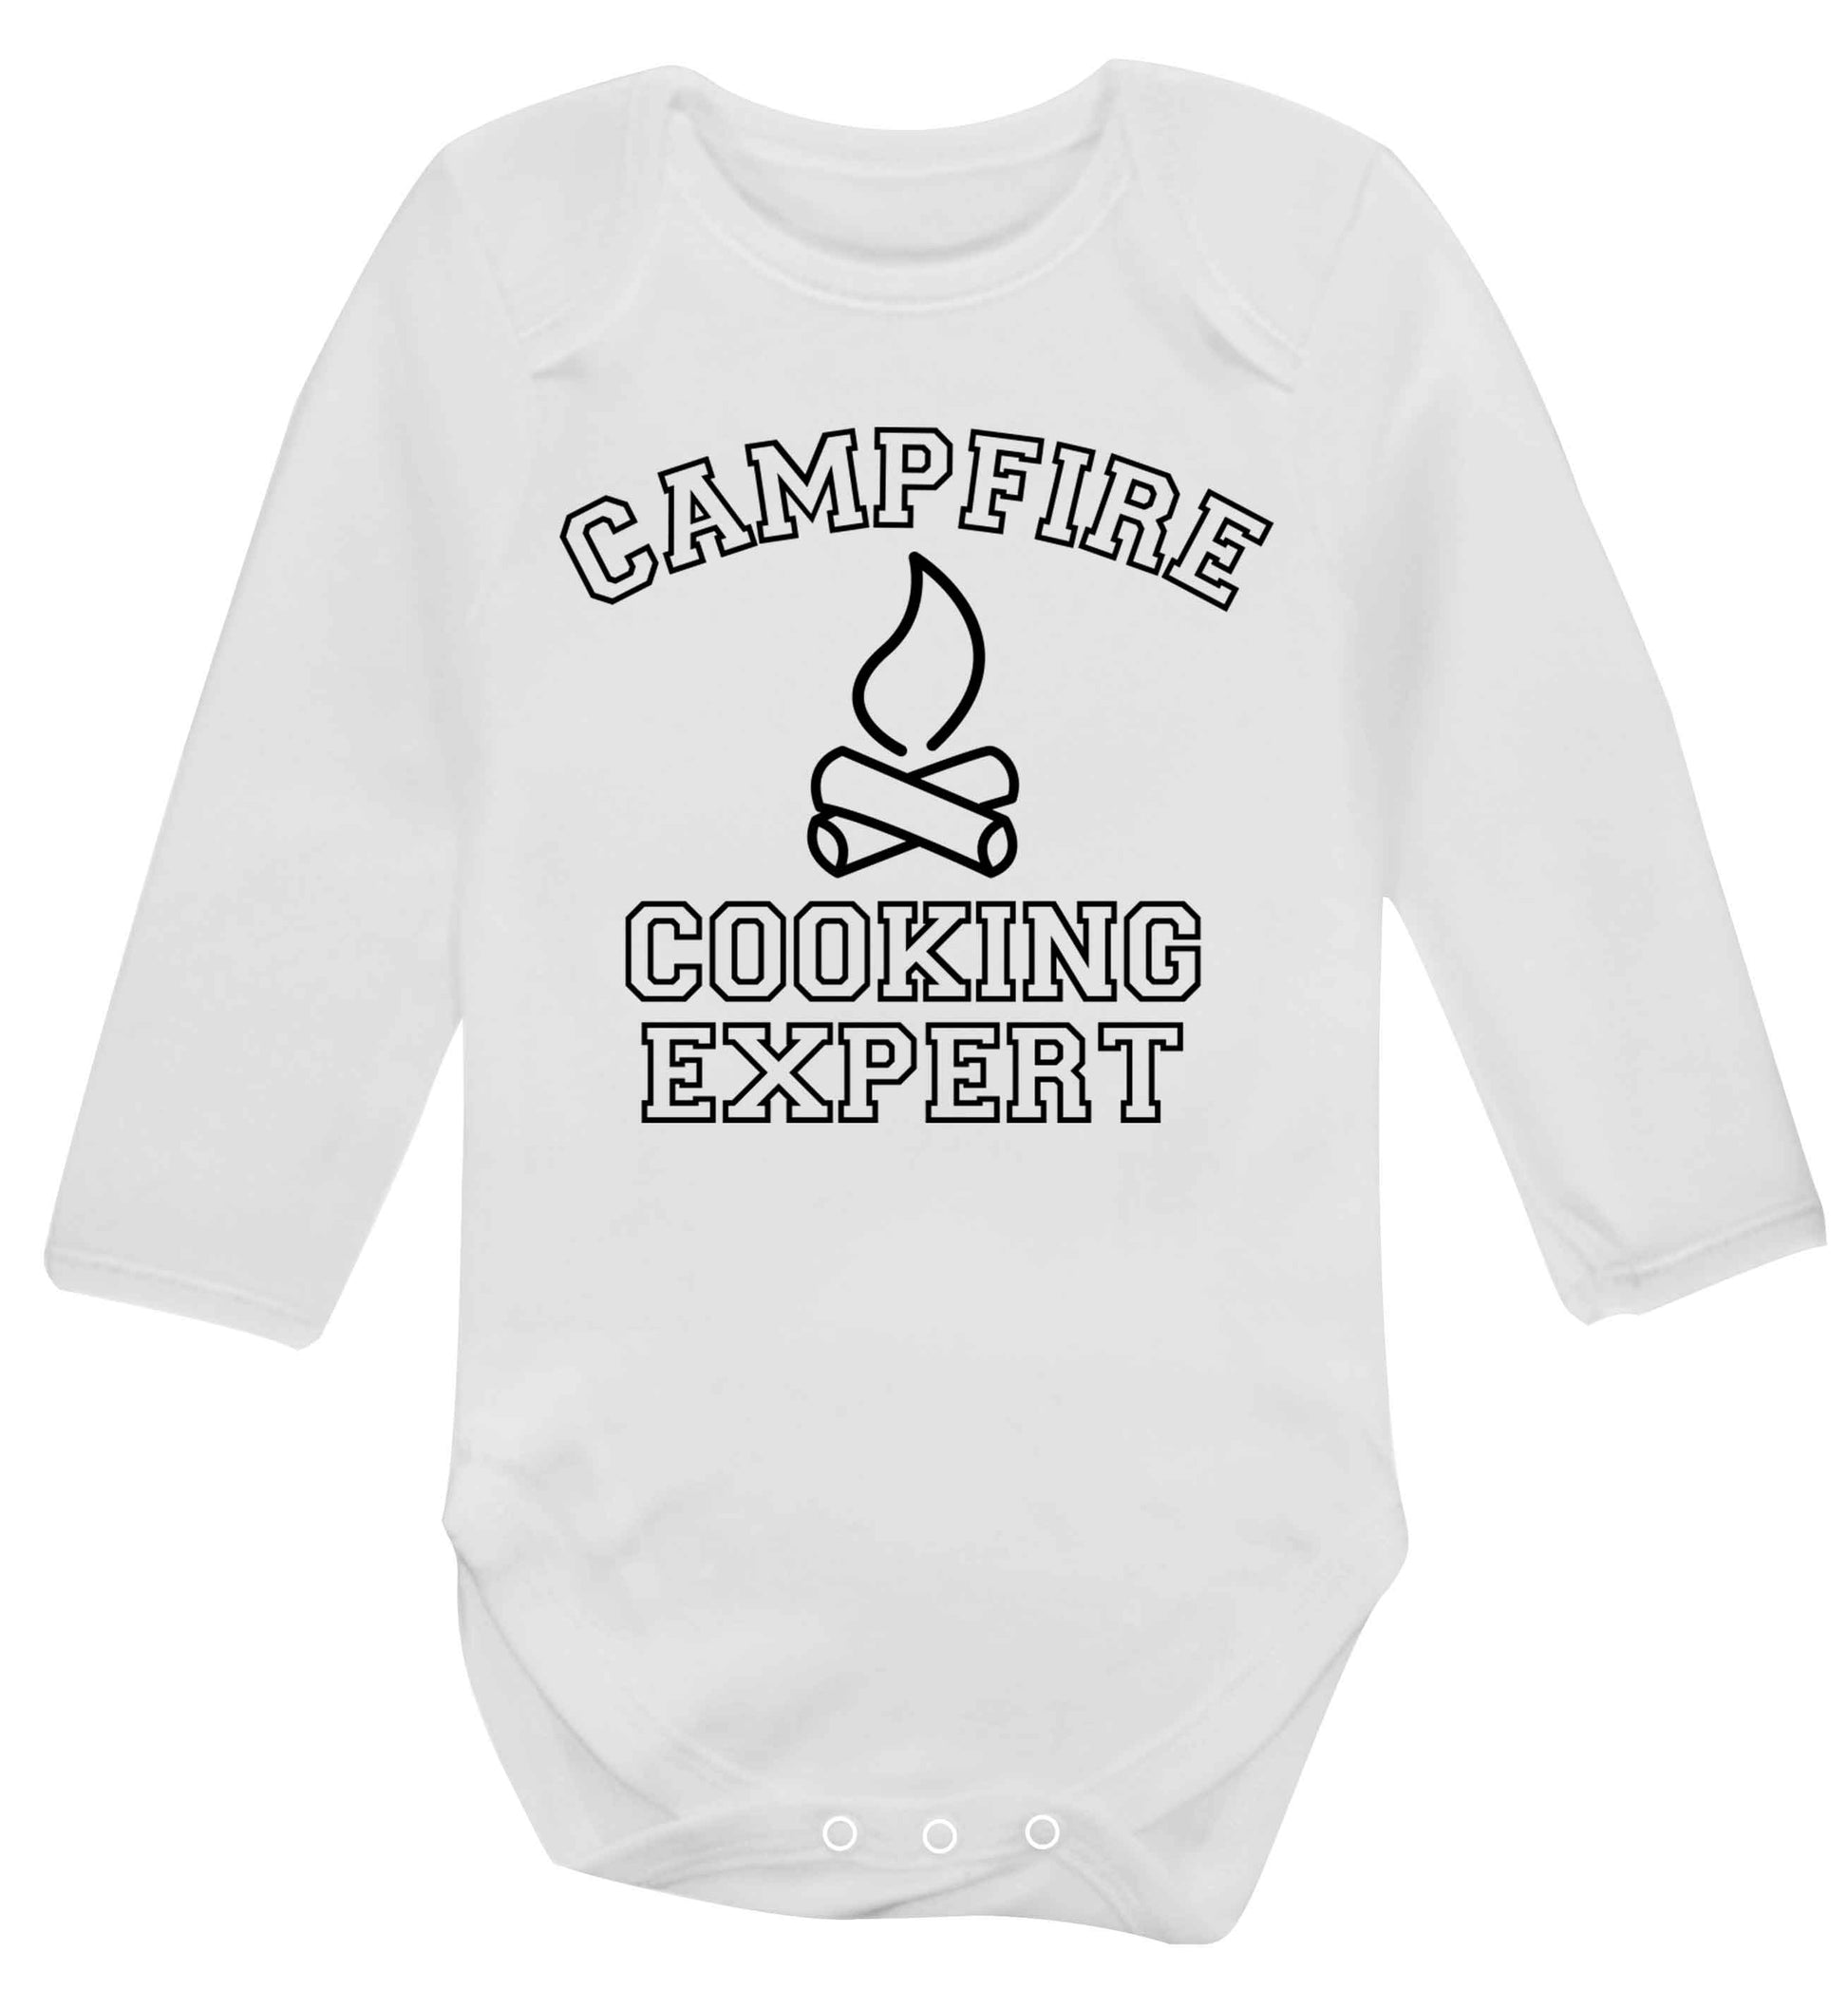 Campfire cooking expert Baby Vest long sleeved white 6-12 months